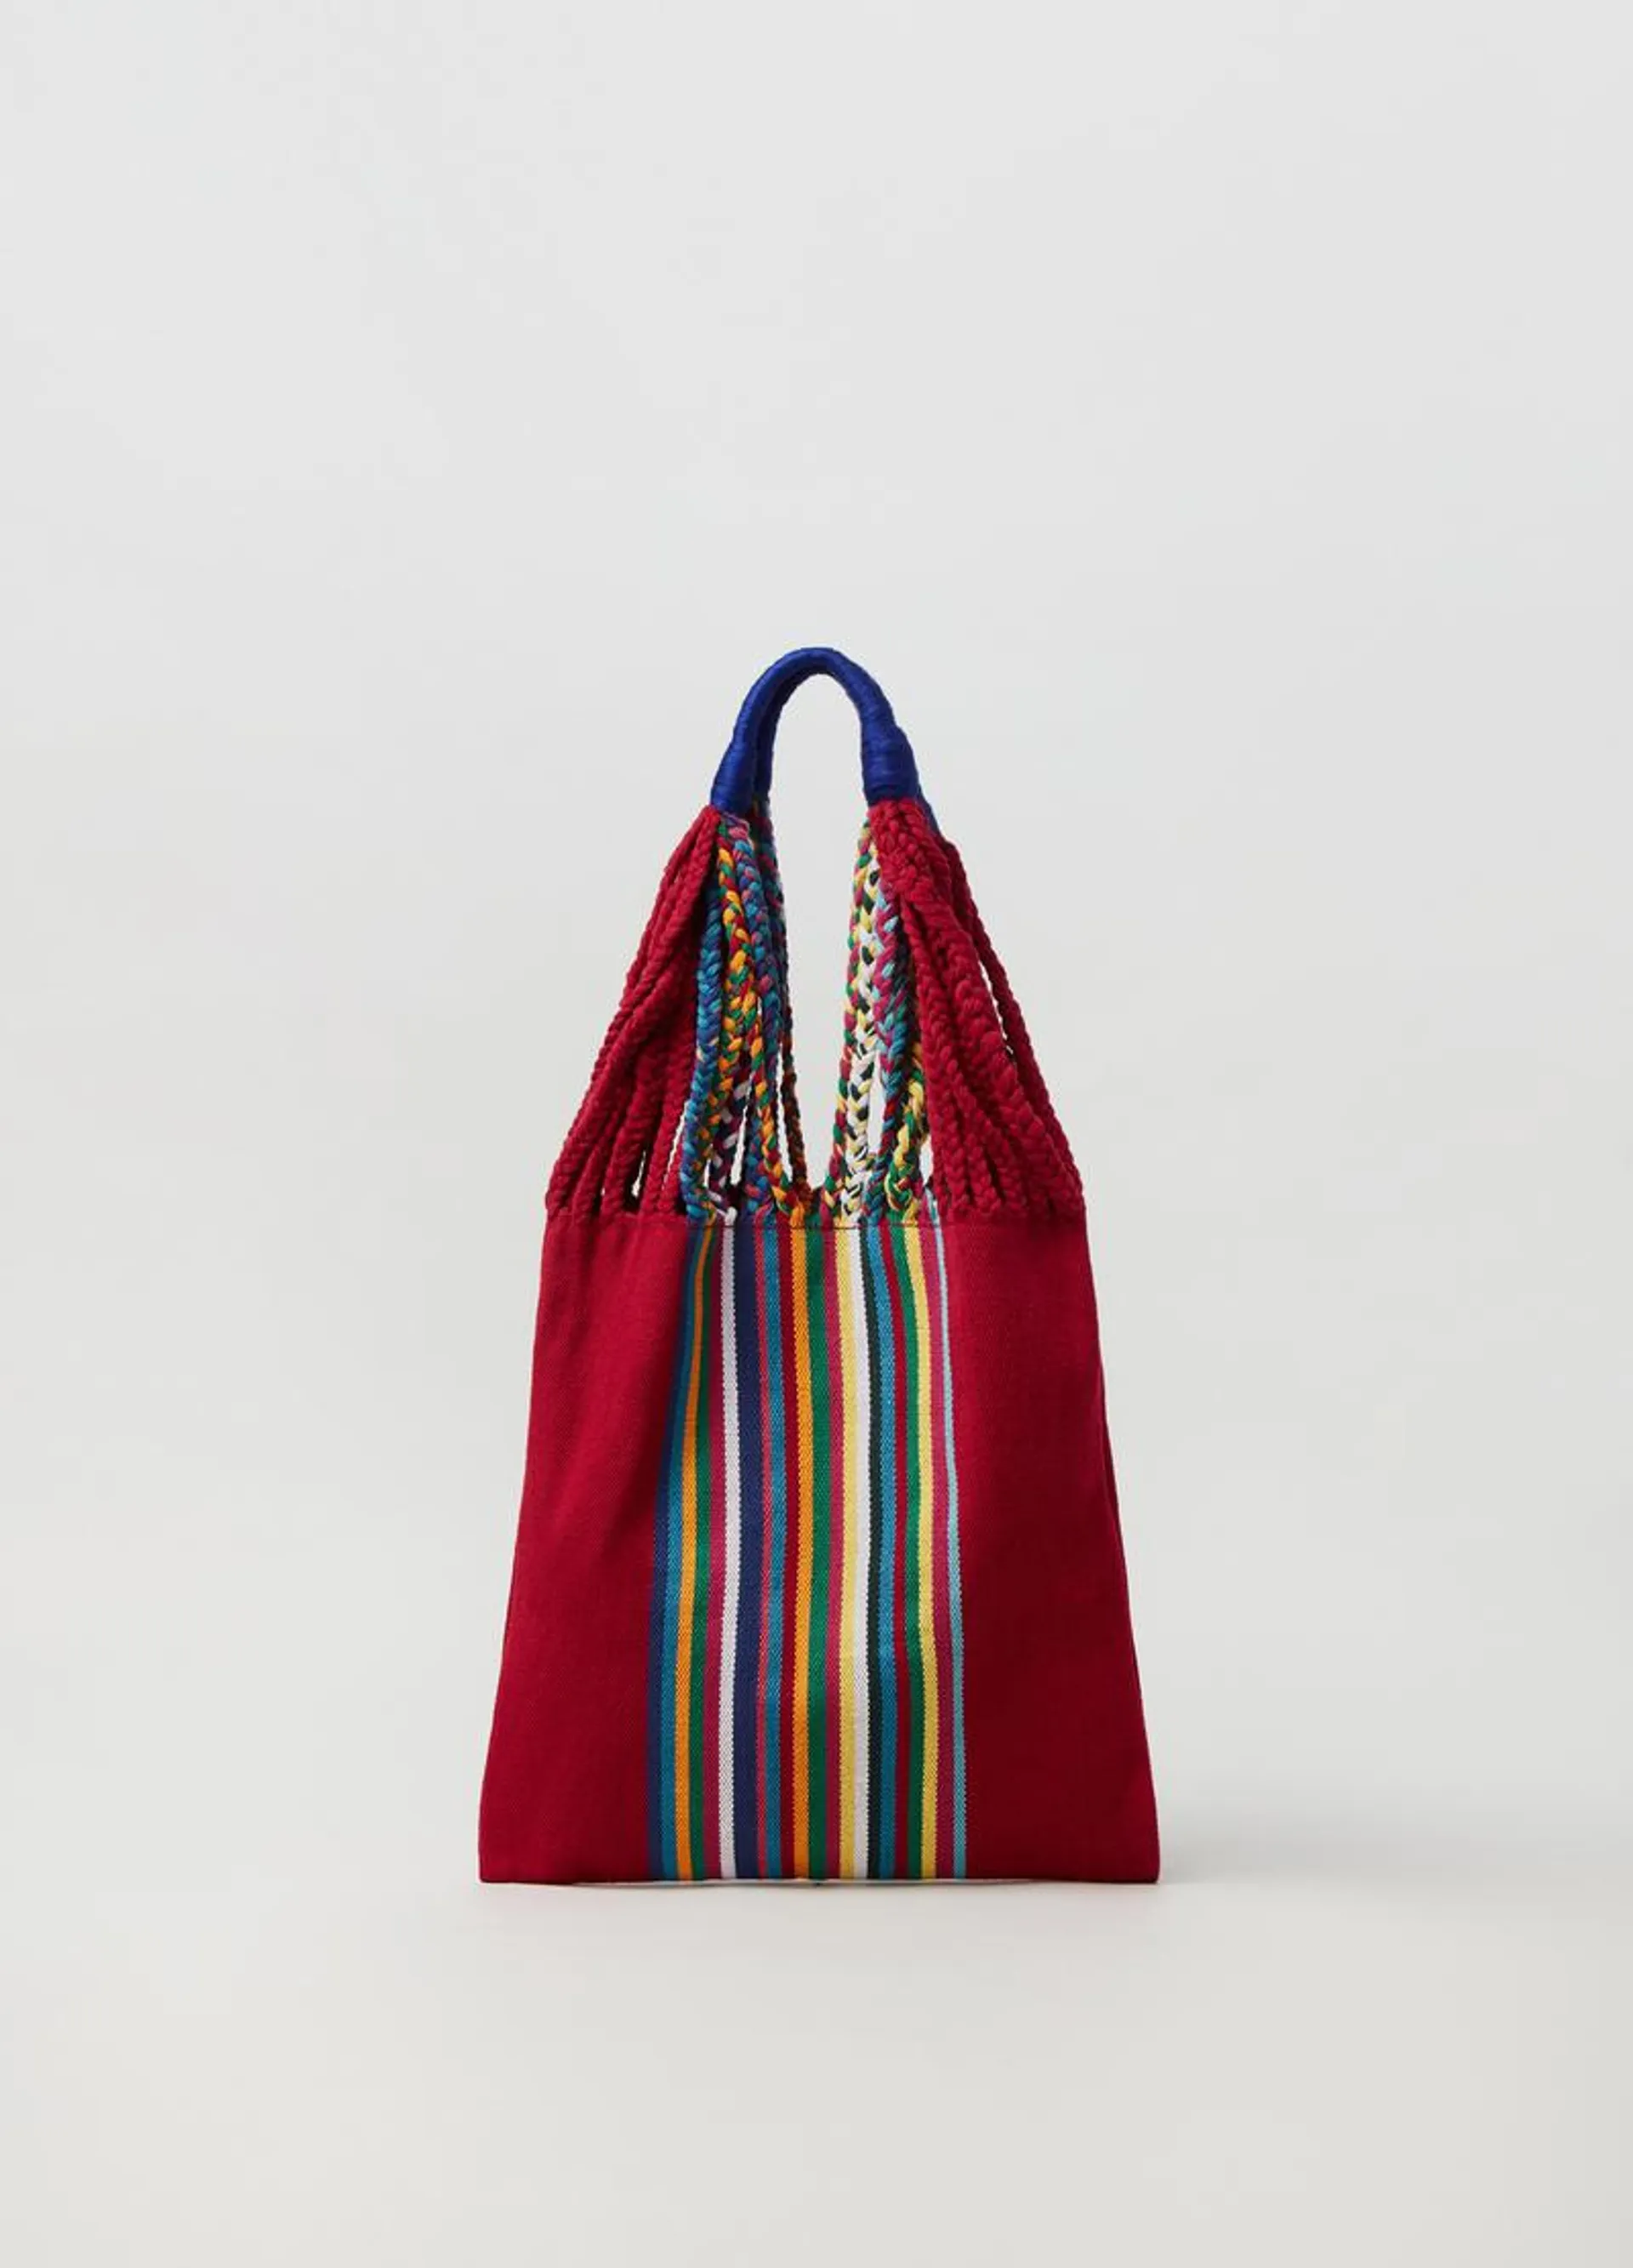 PIOMBO shopping bag with braided handles